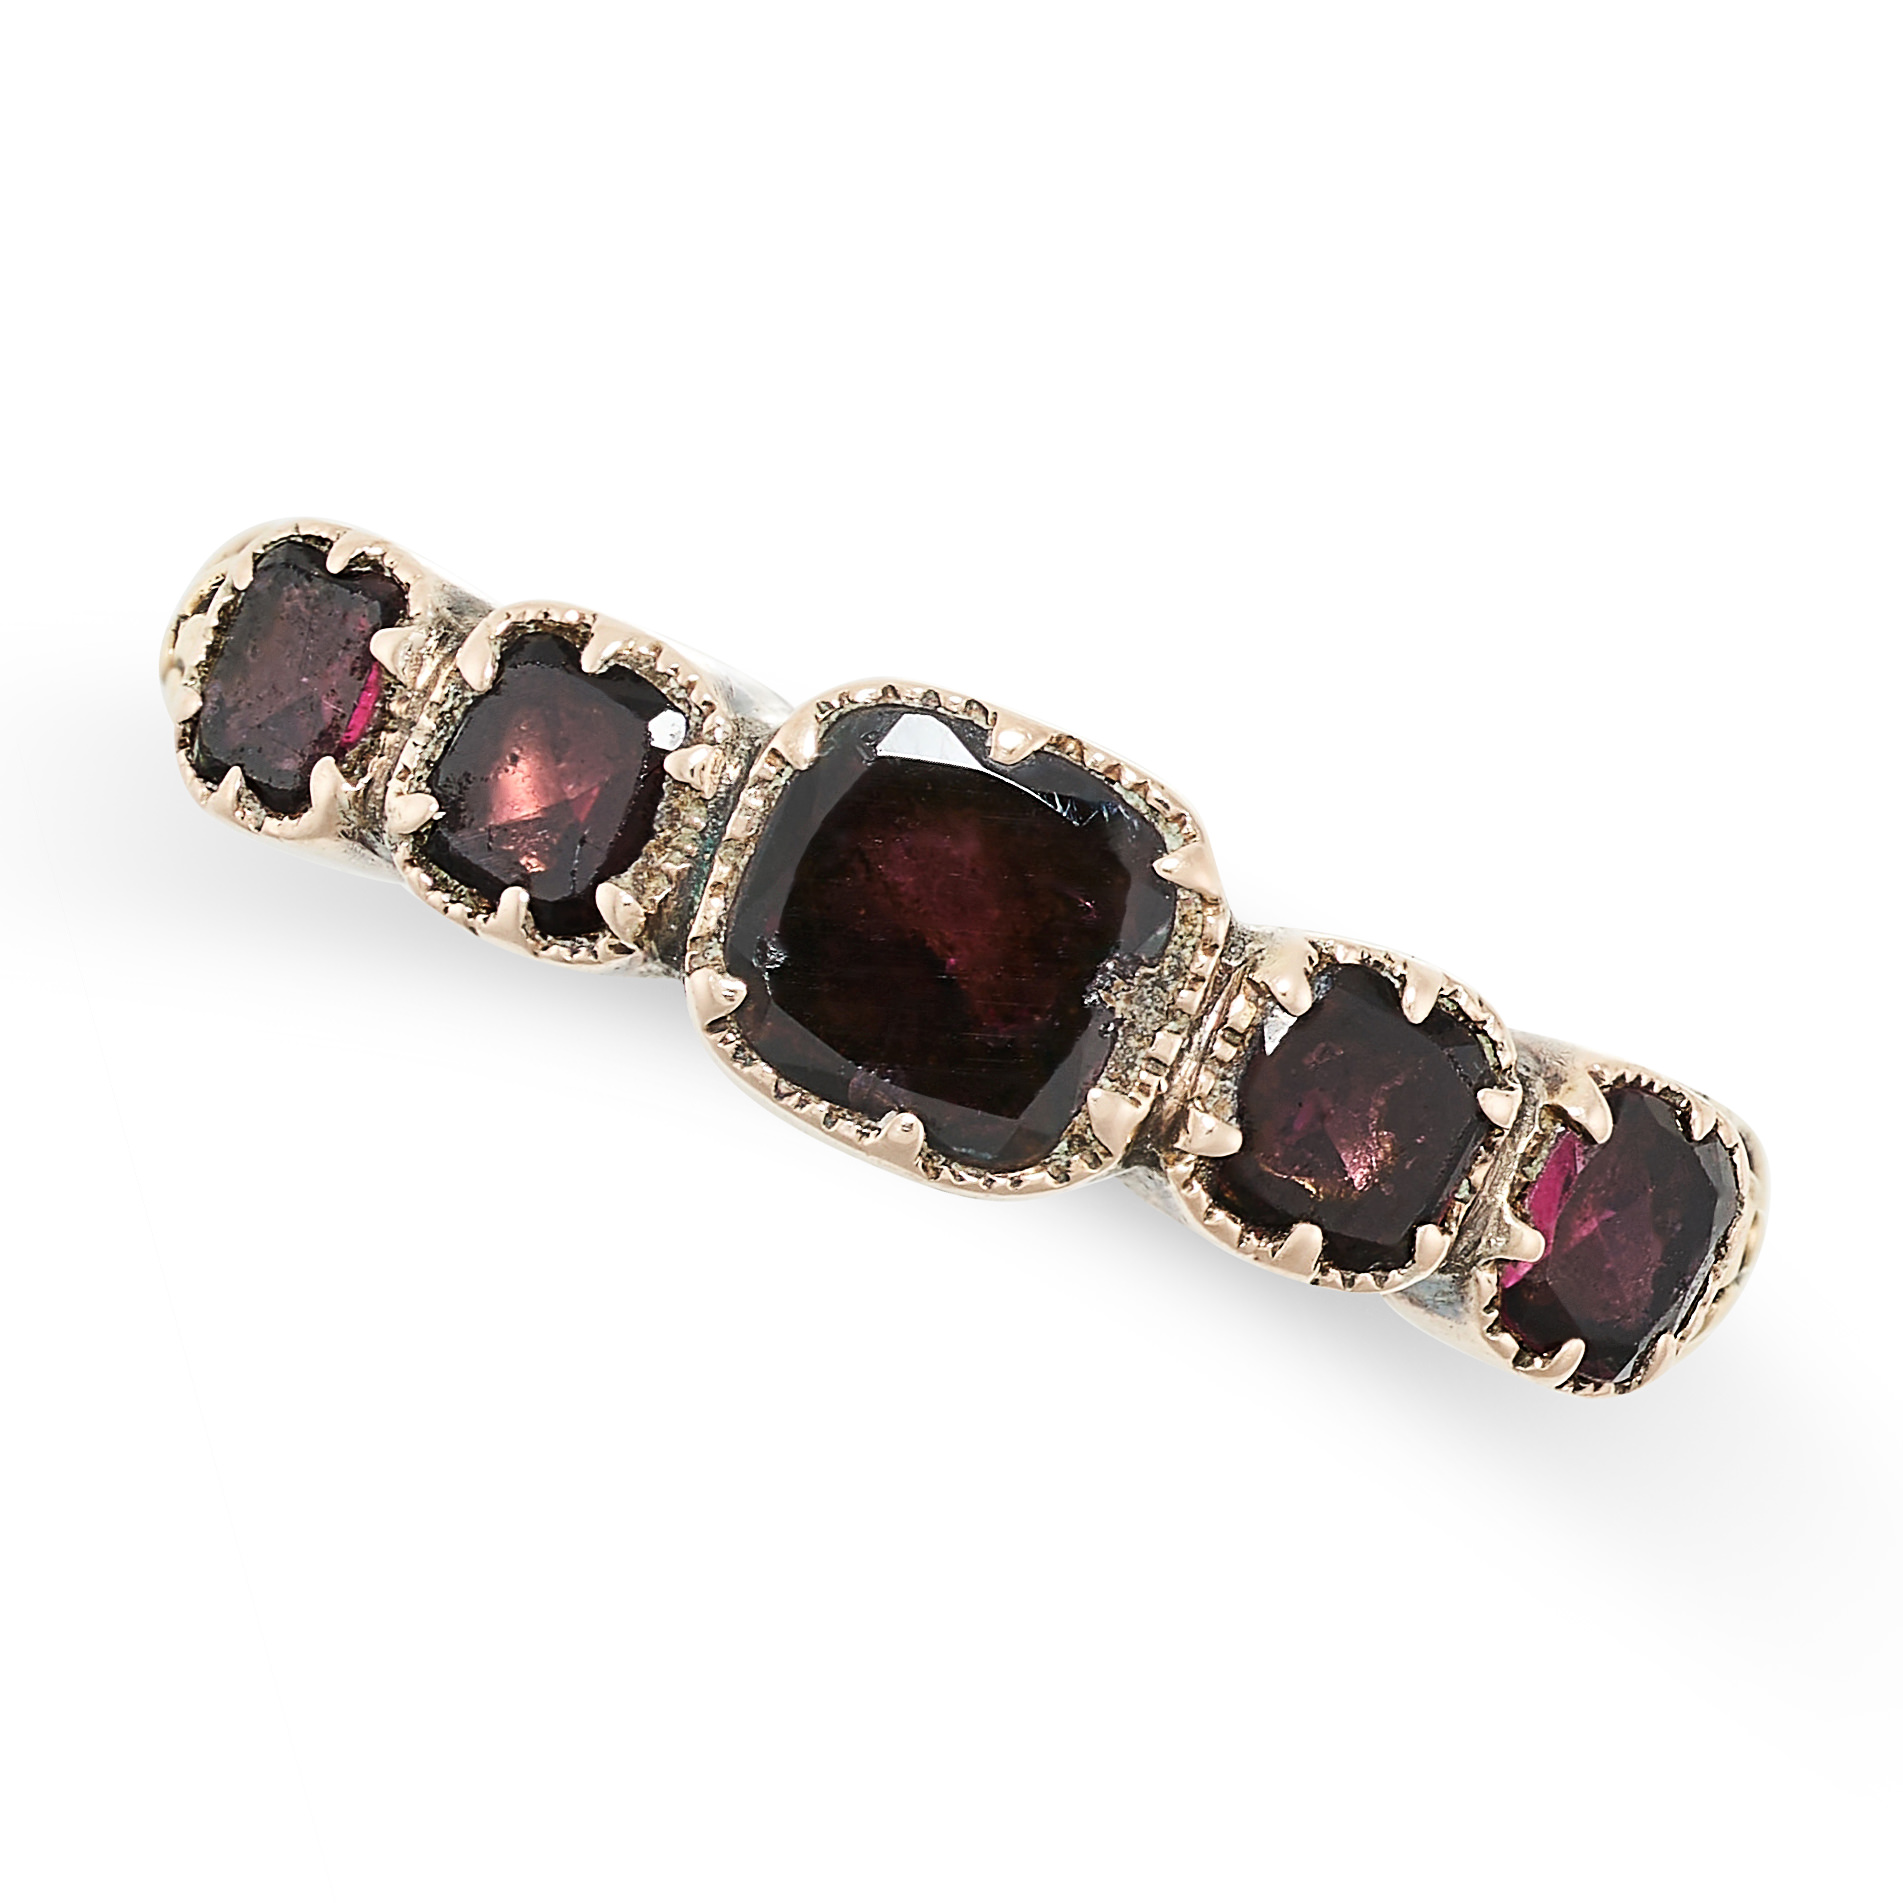 AN ANTIQUE GARNET RING in yellow gold, set with five cushion cut garnets, no assay marks, size L /